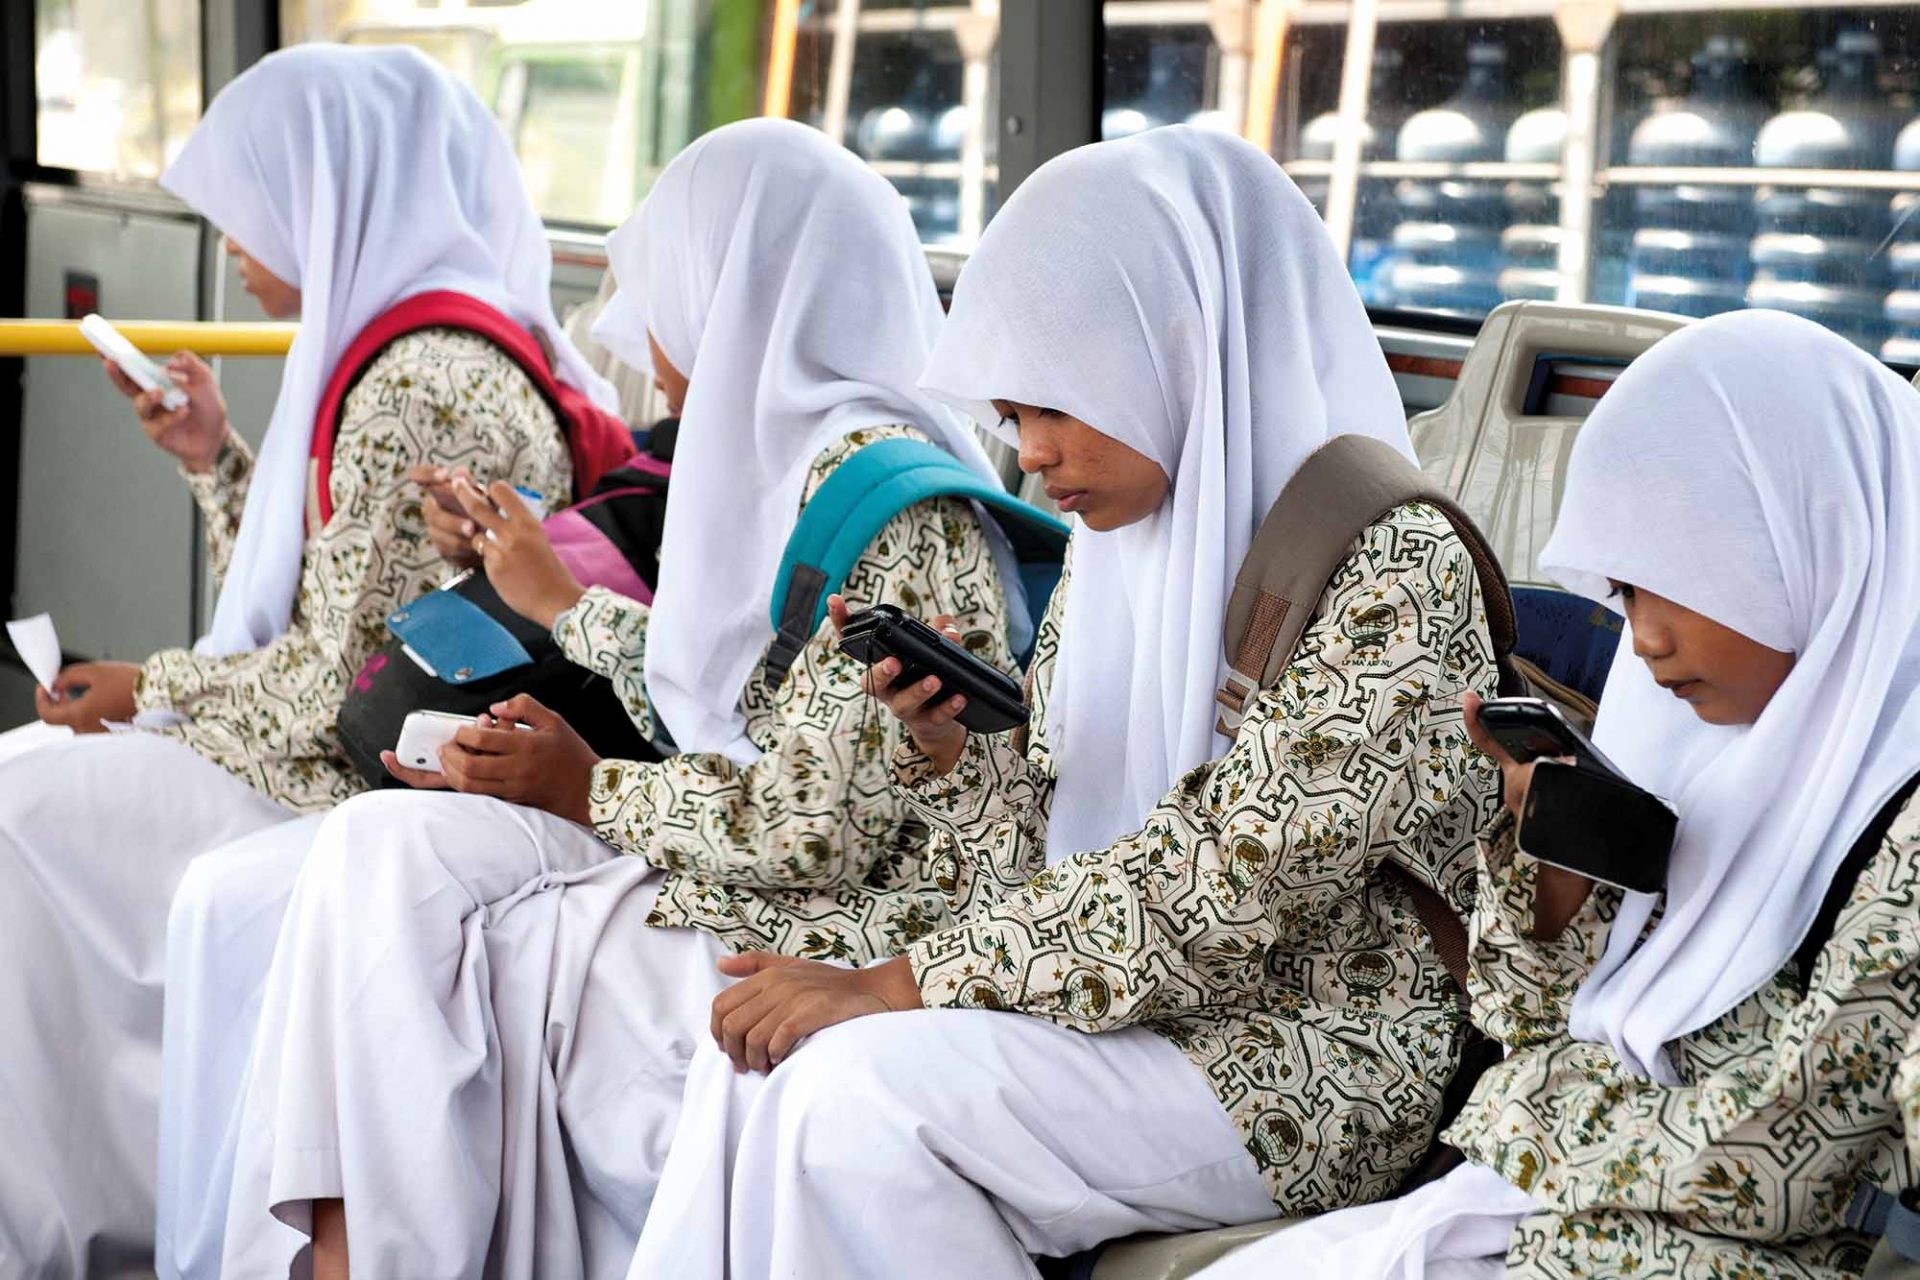 Balinese School Girls With Their Smart Phones On A Bus In Bali, Indonesia.. Image Shot 10/2014. Exact Date Unknown.